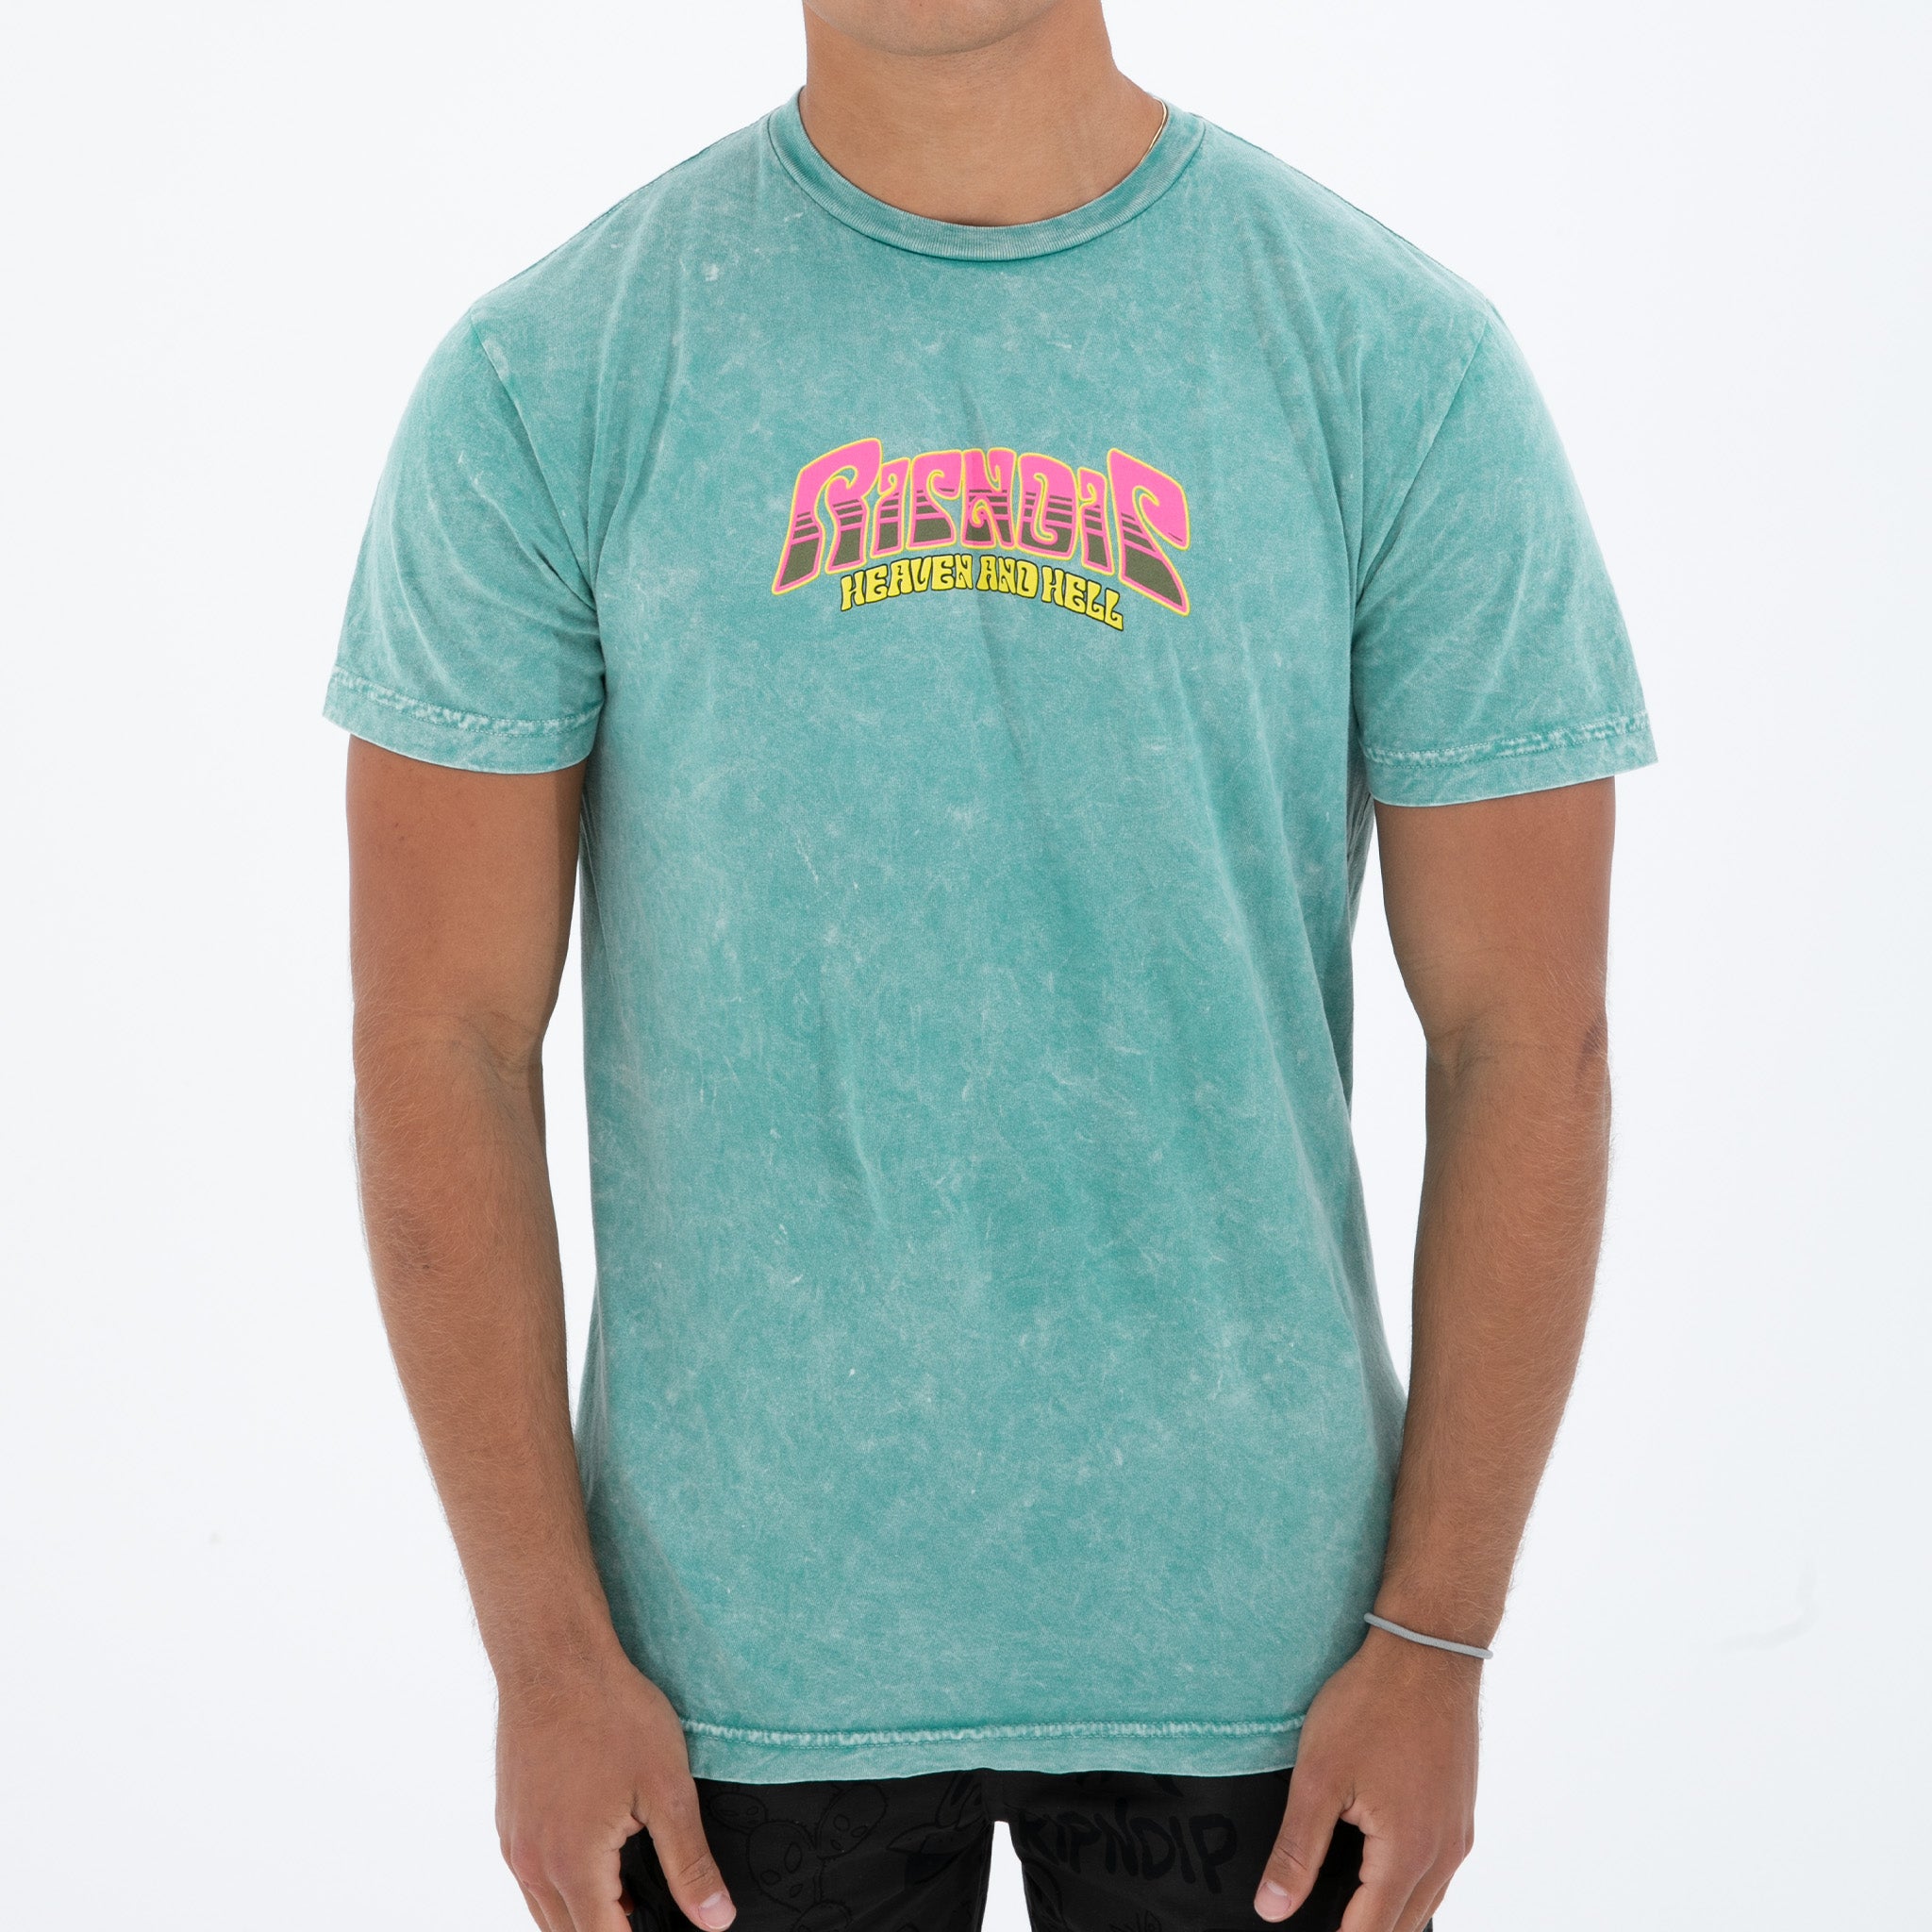 RipNDip Heaven And Heck Battle Tee (Teal Mineral Wash)